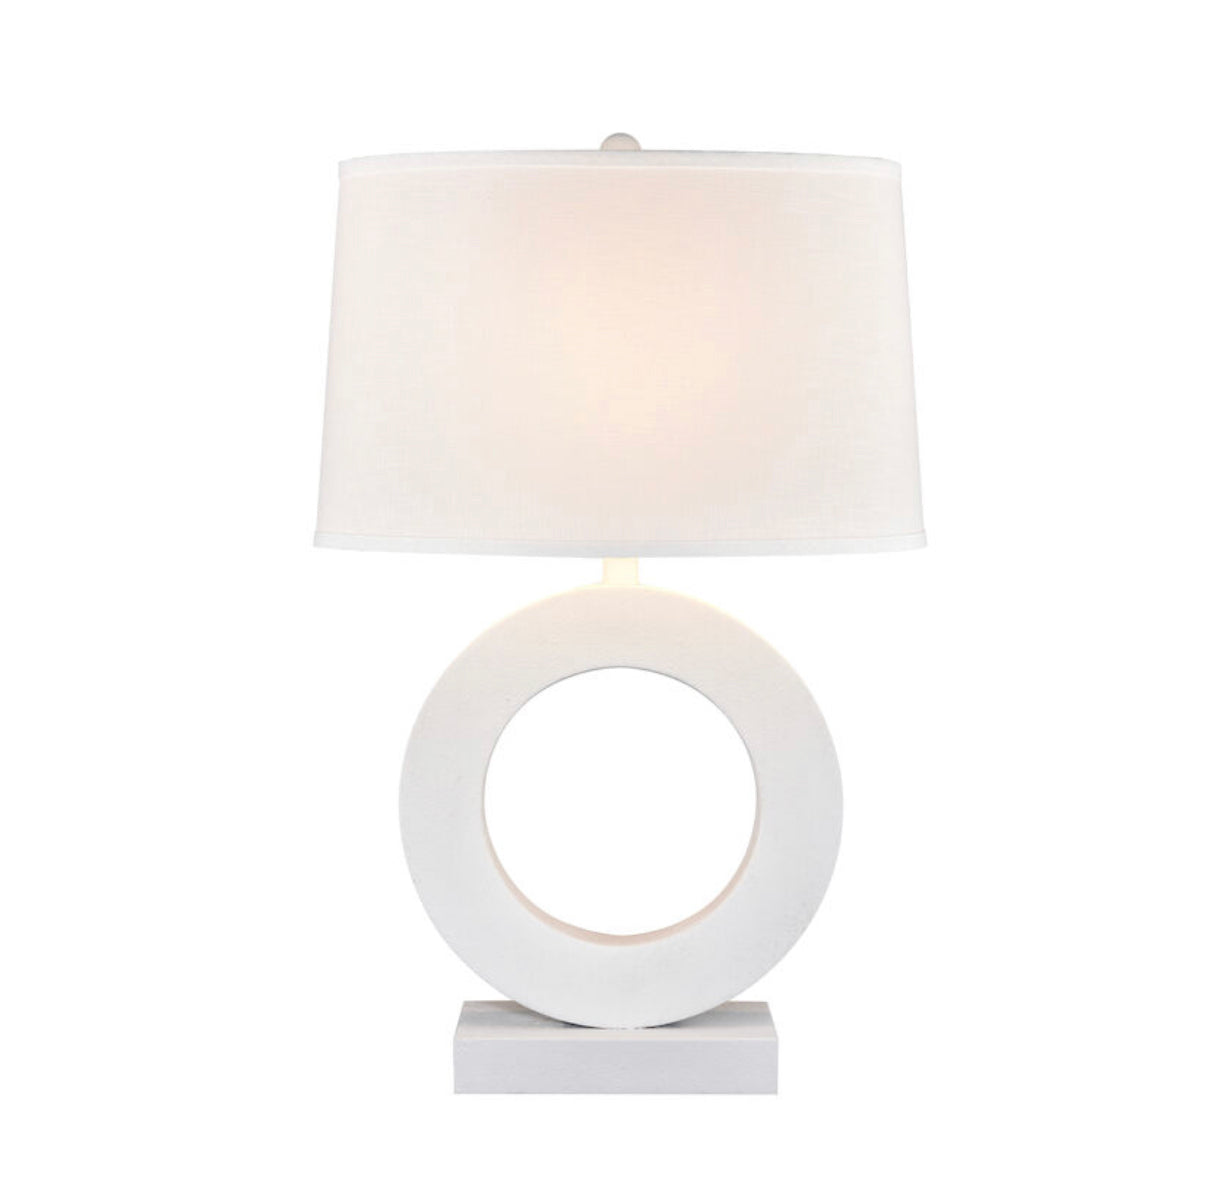 Ideal for a contemporary living room or hallway, the Around The Edge Table Lamp features a circular composite body in a sleek matte finish. Its bold, sculptural silhouette is complemented by an oval hardback shade in off white linen.  Dimensions:21" W x 13.5" D x 32" H